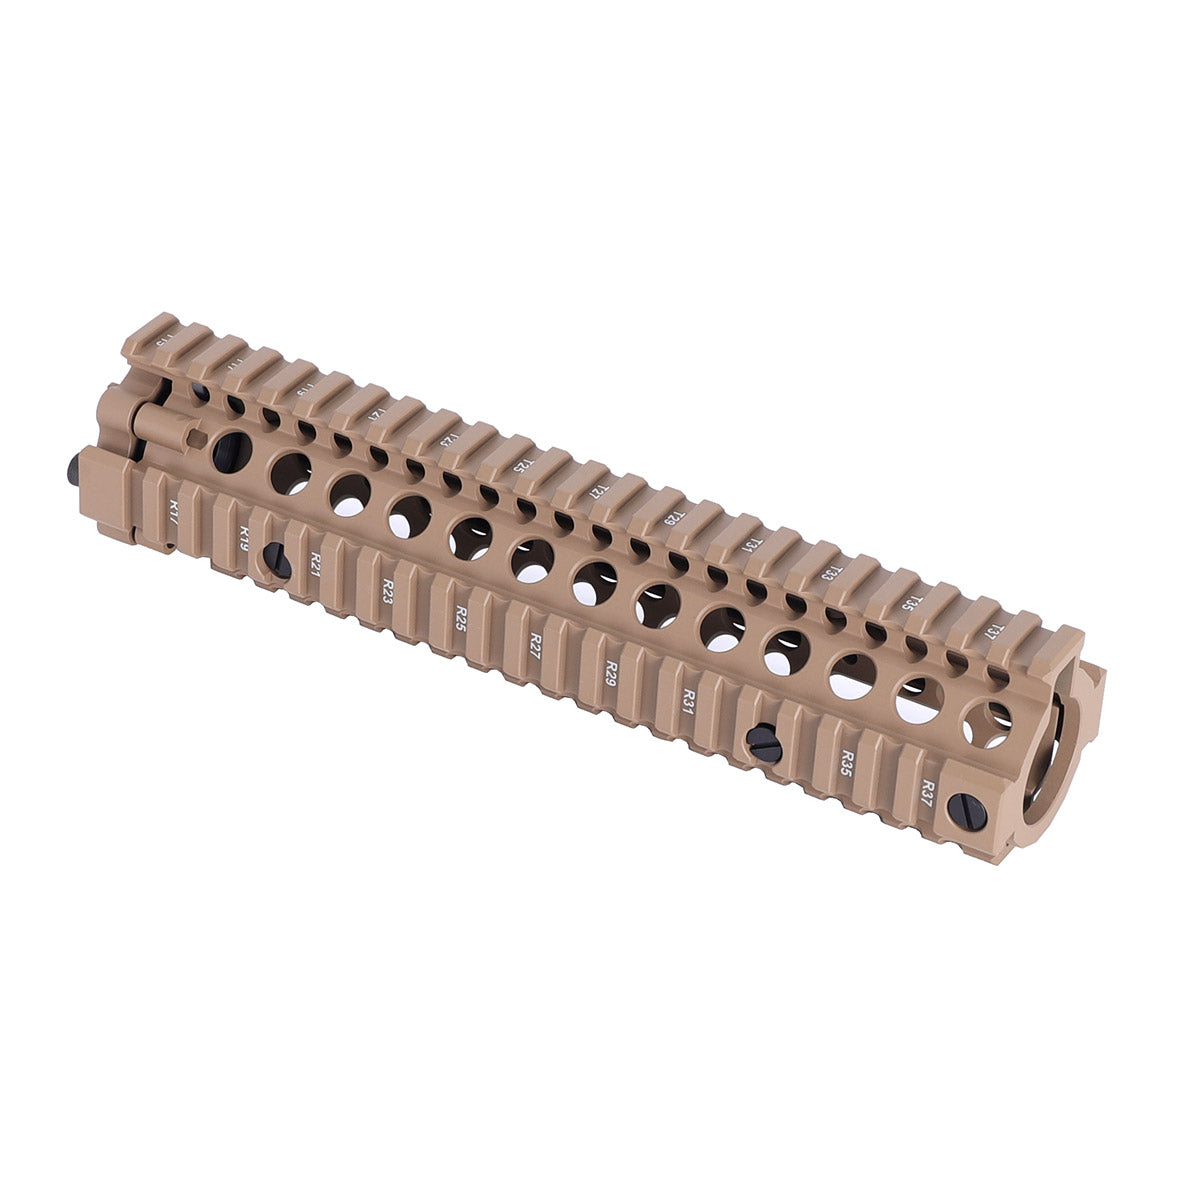 ohhunt® Desert Tan Mid-Length MK18 Quad Rail Handguard Free Float Two-pieces Drop-in Design for AR-15 - 9.6 inch